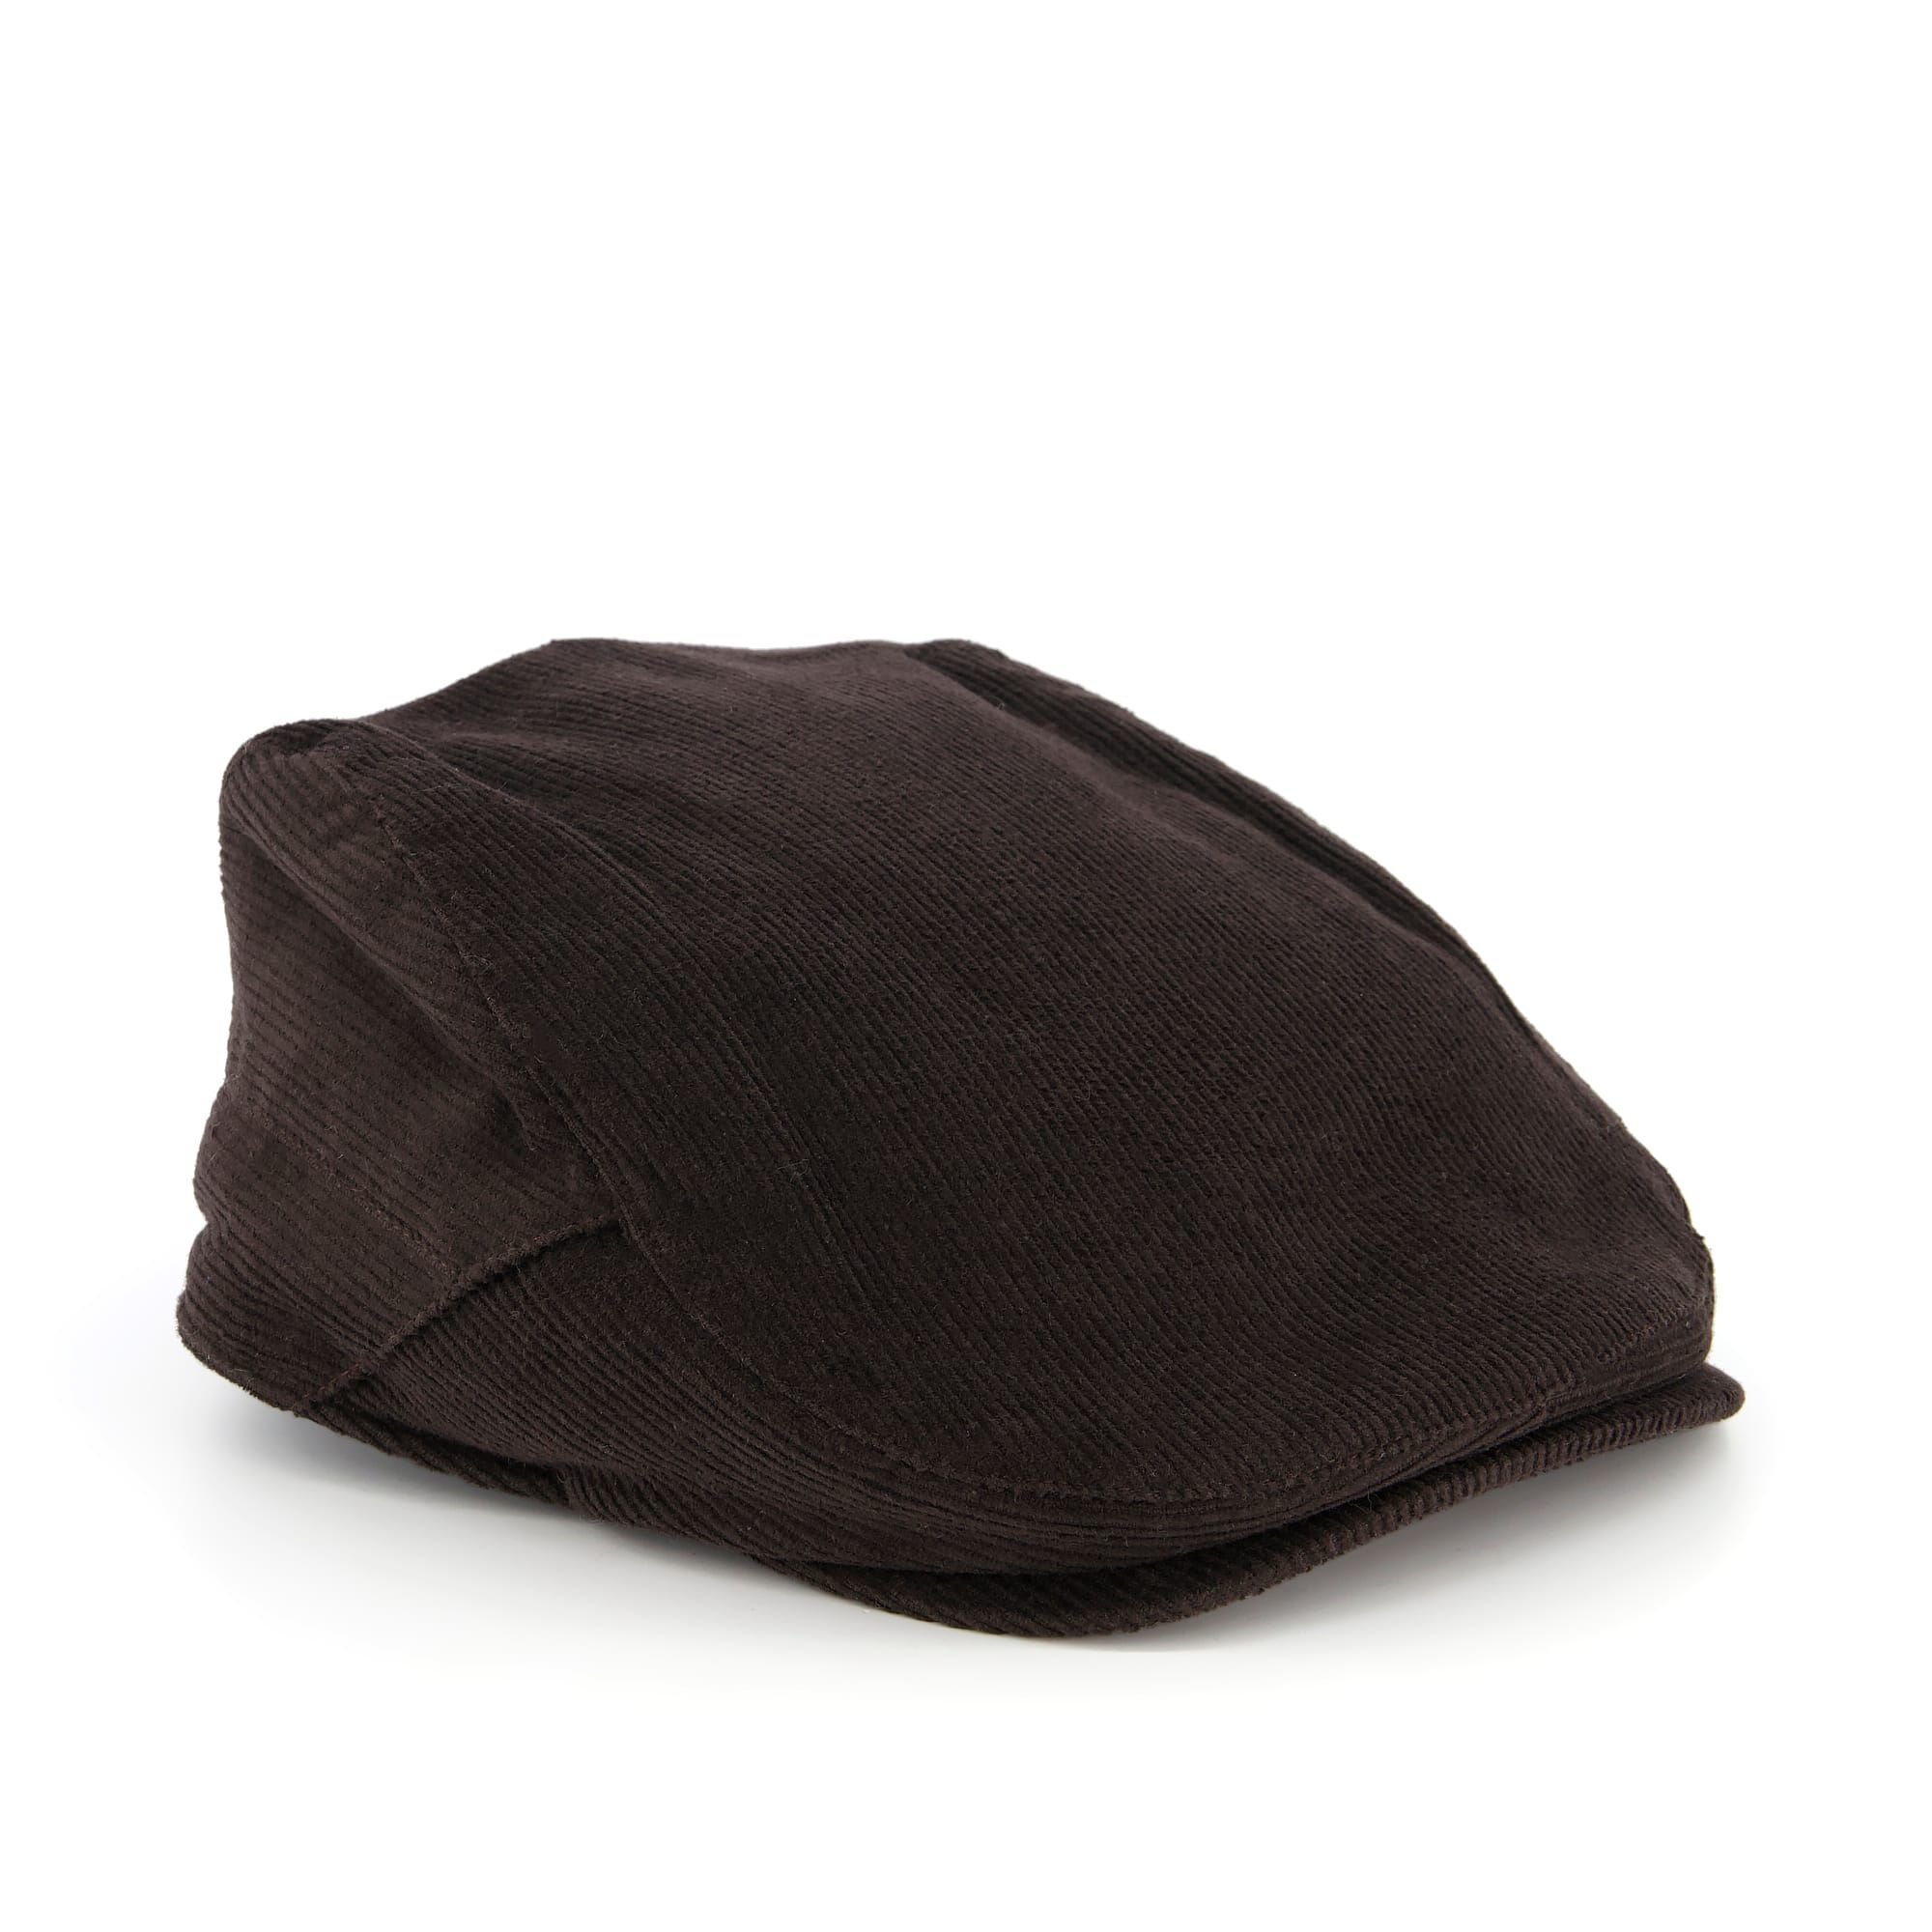 Take on autumn with the help of this classic men's flatcap, designed to fit securely on the head with a slim silhouette for that dapper look.